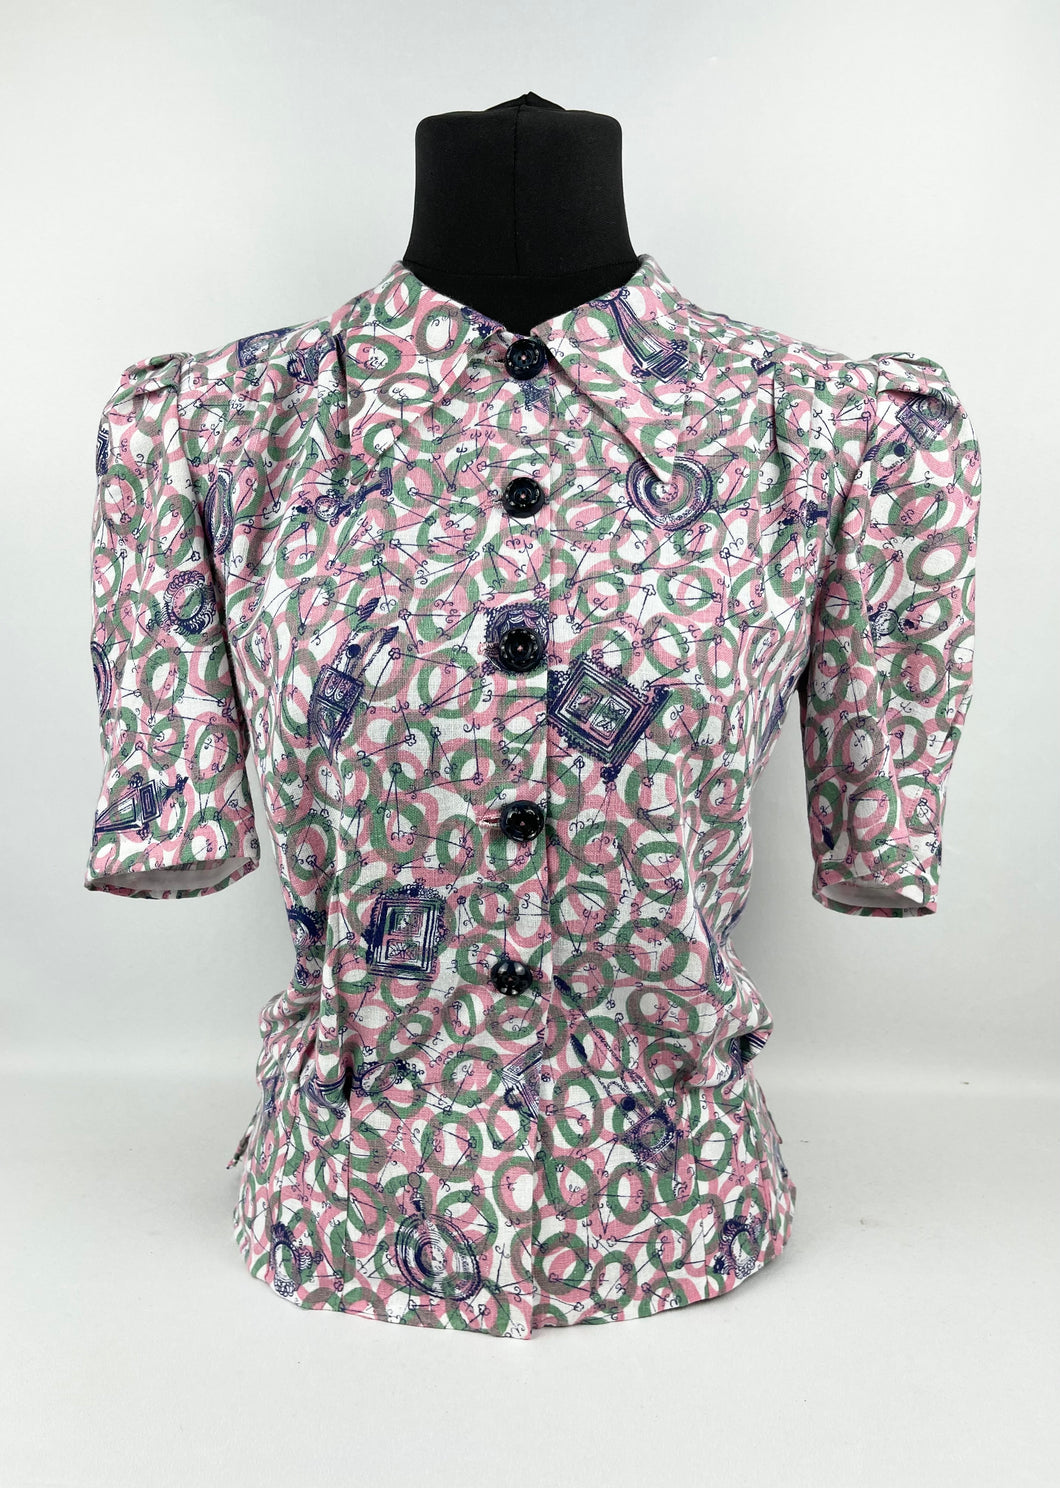 1940's Reproduction Novelty Print Blouse with Clocks and Clock Hands Made From an Original 1940's Feed Sack - B34 35